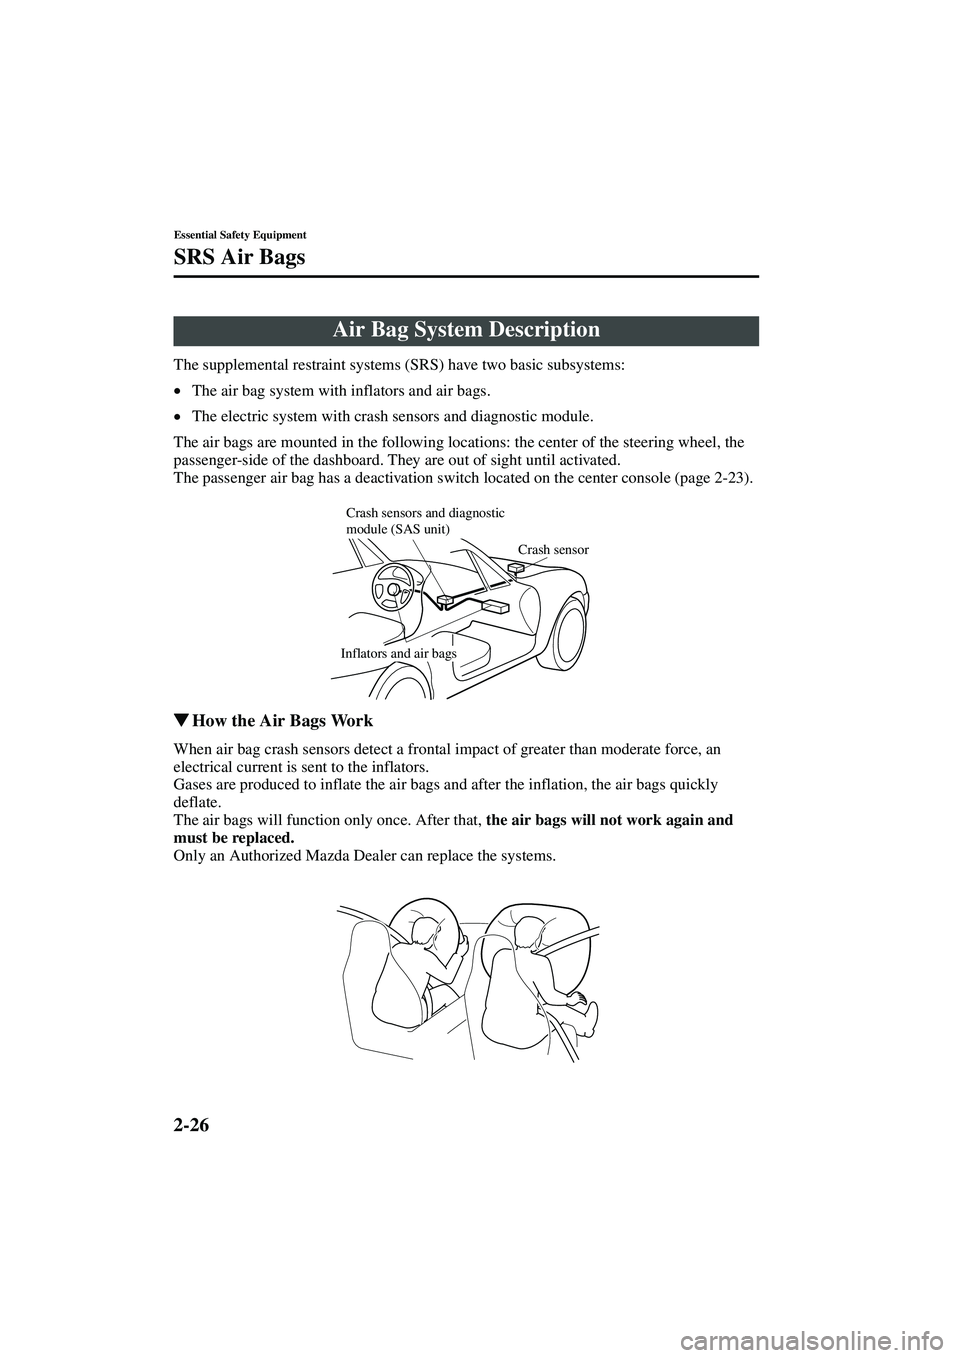 MAZDA MODEL MX-5 MIATA 2004 Owners Guide 2-26
Essential Safety Equipment
SRS Air Bags
Form No. 8S15-EA-03G
The supplemental restraint systems (SRS) have two basic subsystems:
•The air bag system with inflators and air bags.
• The electri